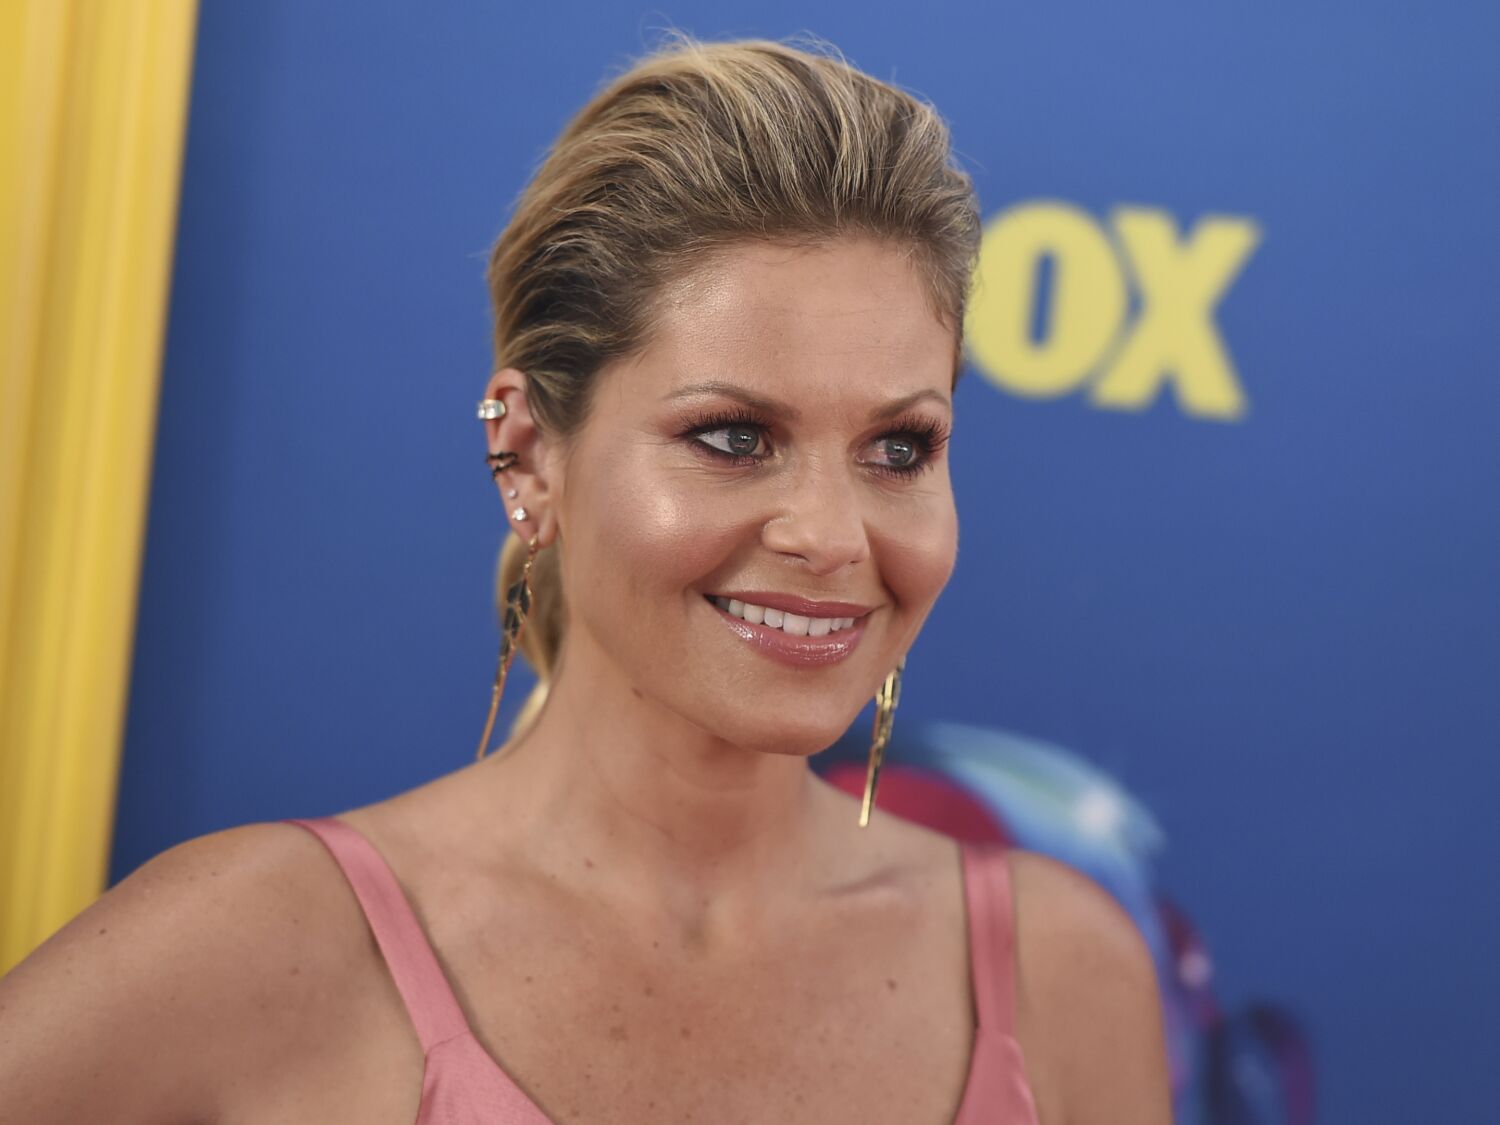 Candace Cameron Bure says she 'never' tried to remove gay 'Fuller House' character